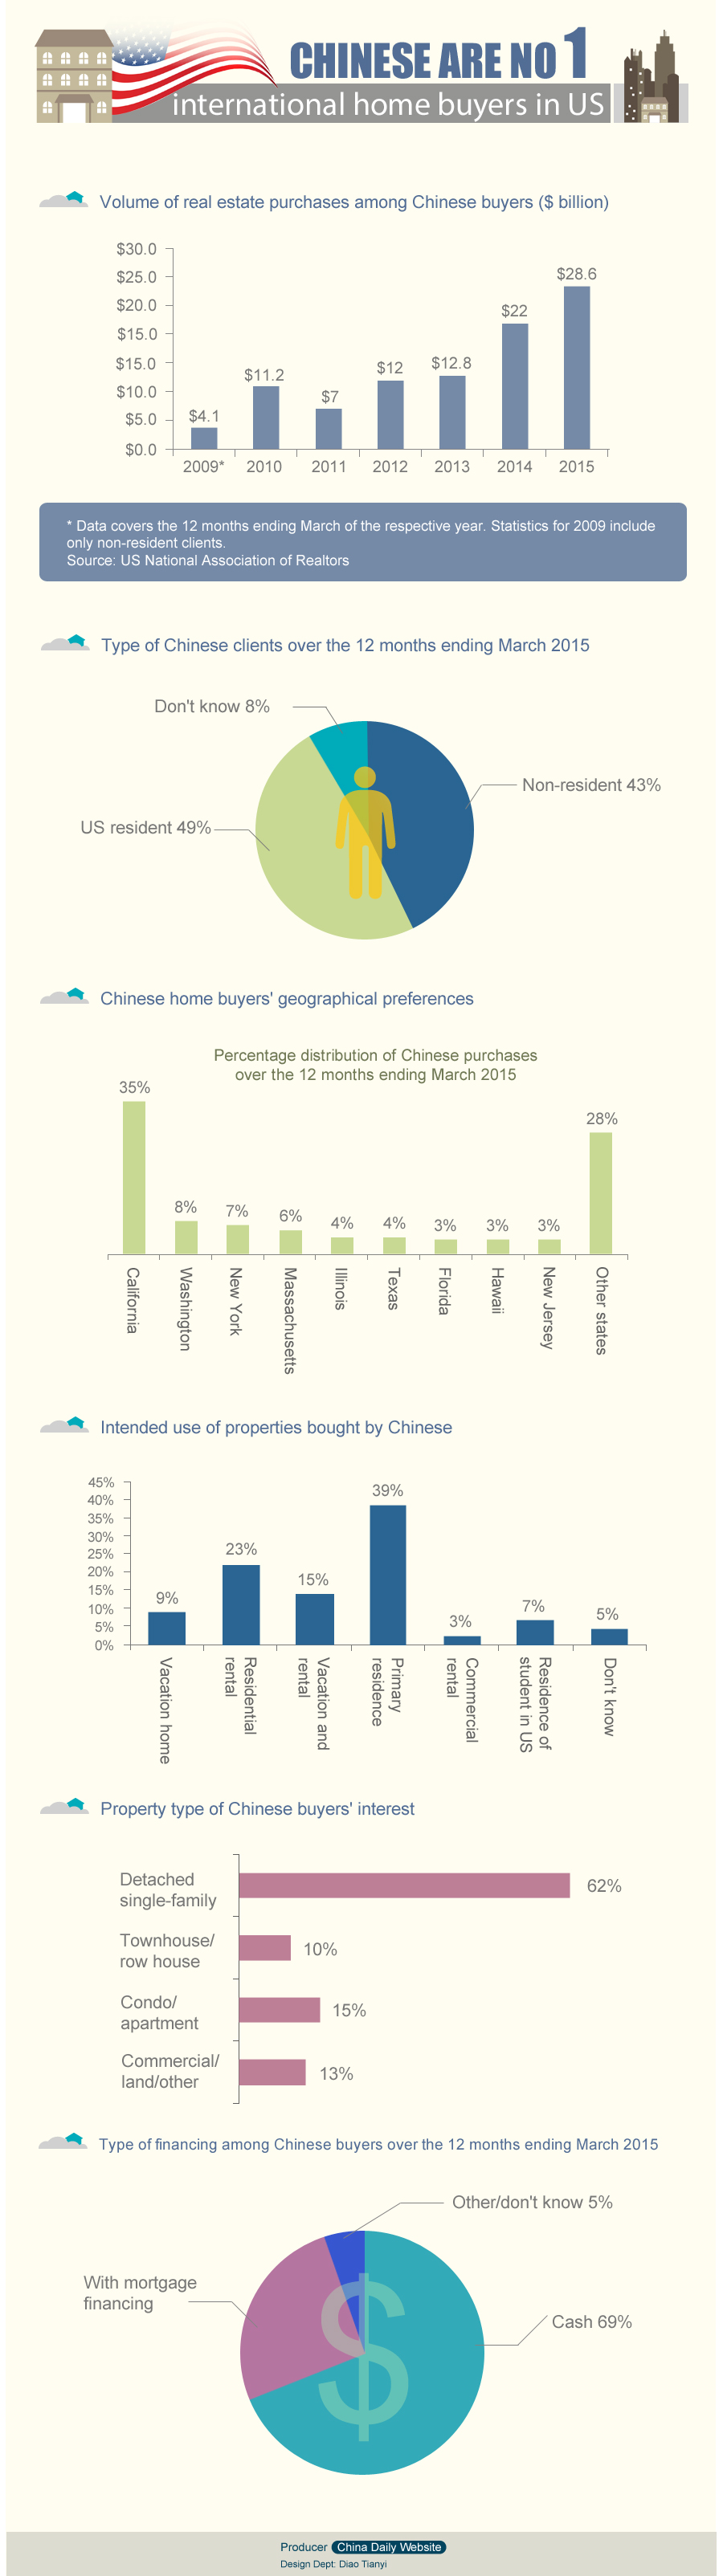 Infographic: Chinese are No 1 international home buyers in US